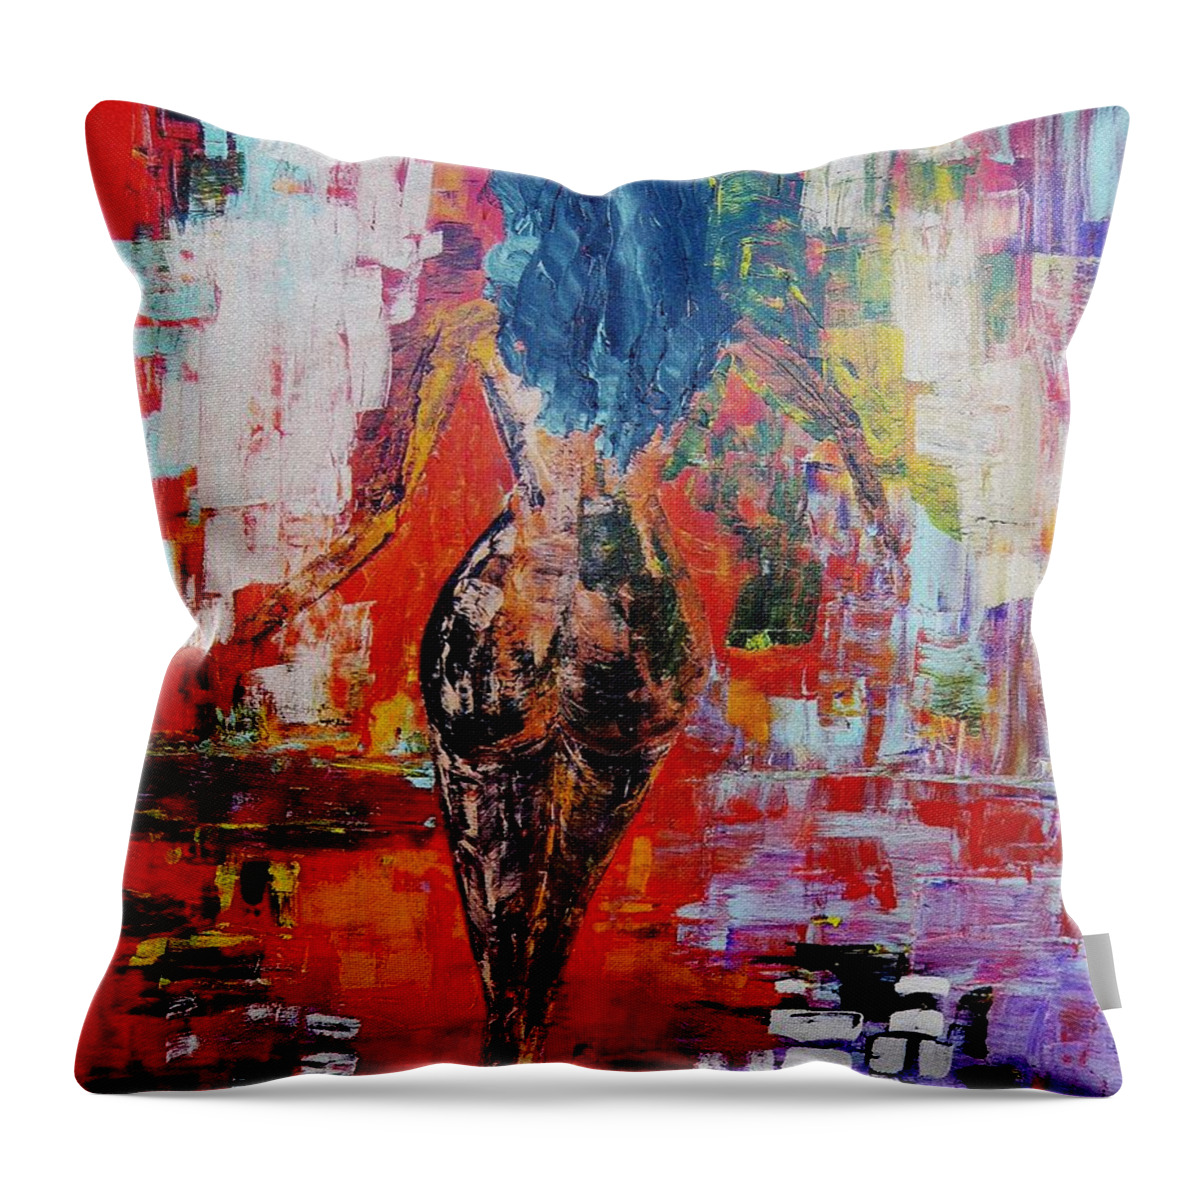 Contemporary Throw Pillow featuring the painting Fantasy by Piety Dsilva